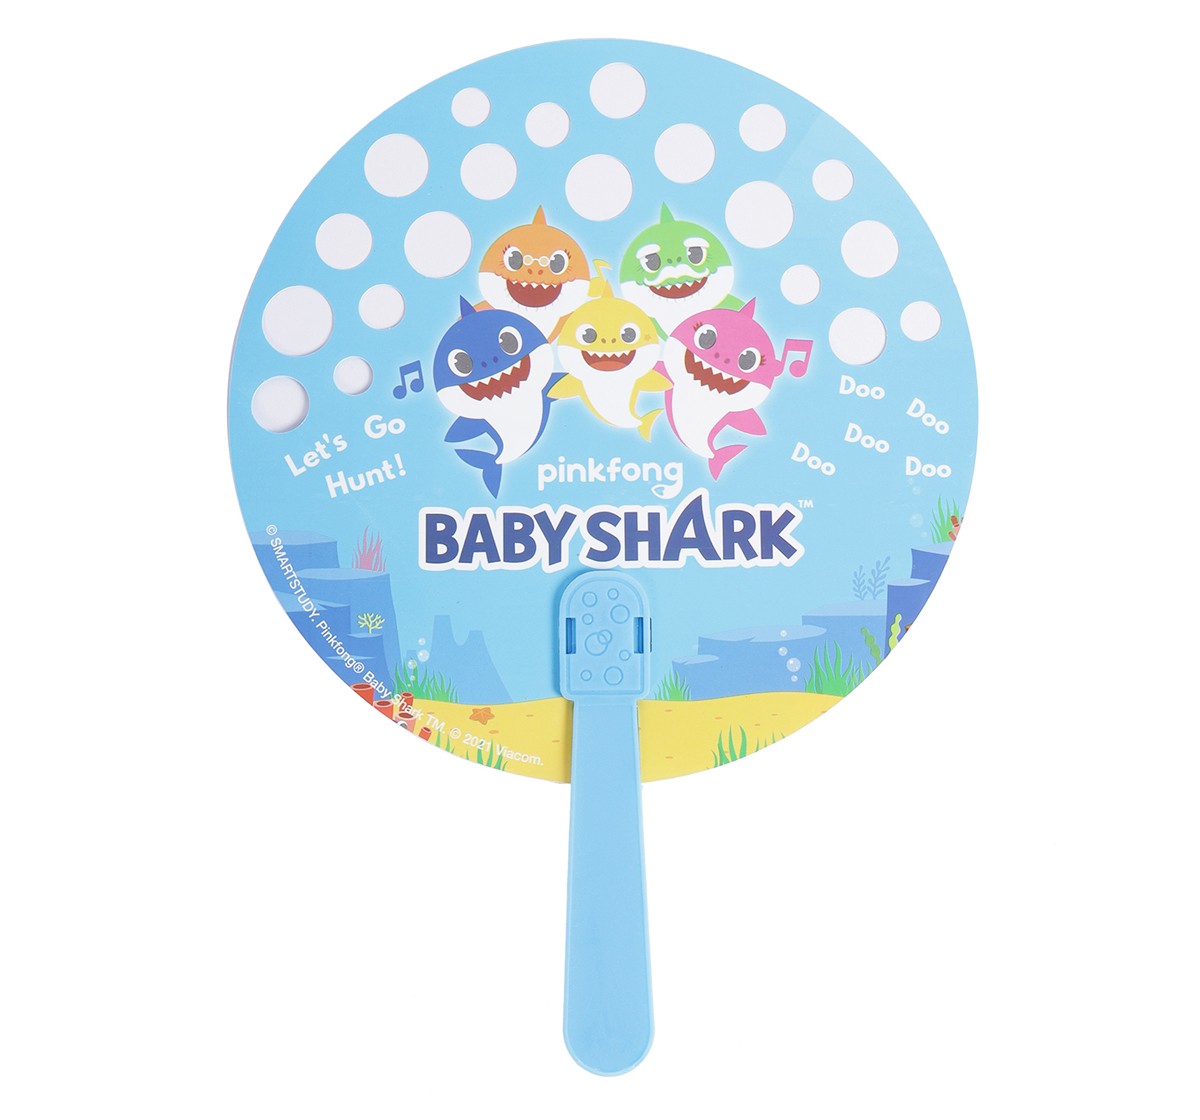 Bubble Magic Fan Bubs Baby Shark, for The Kids 3 Years and Above